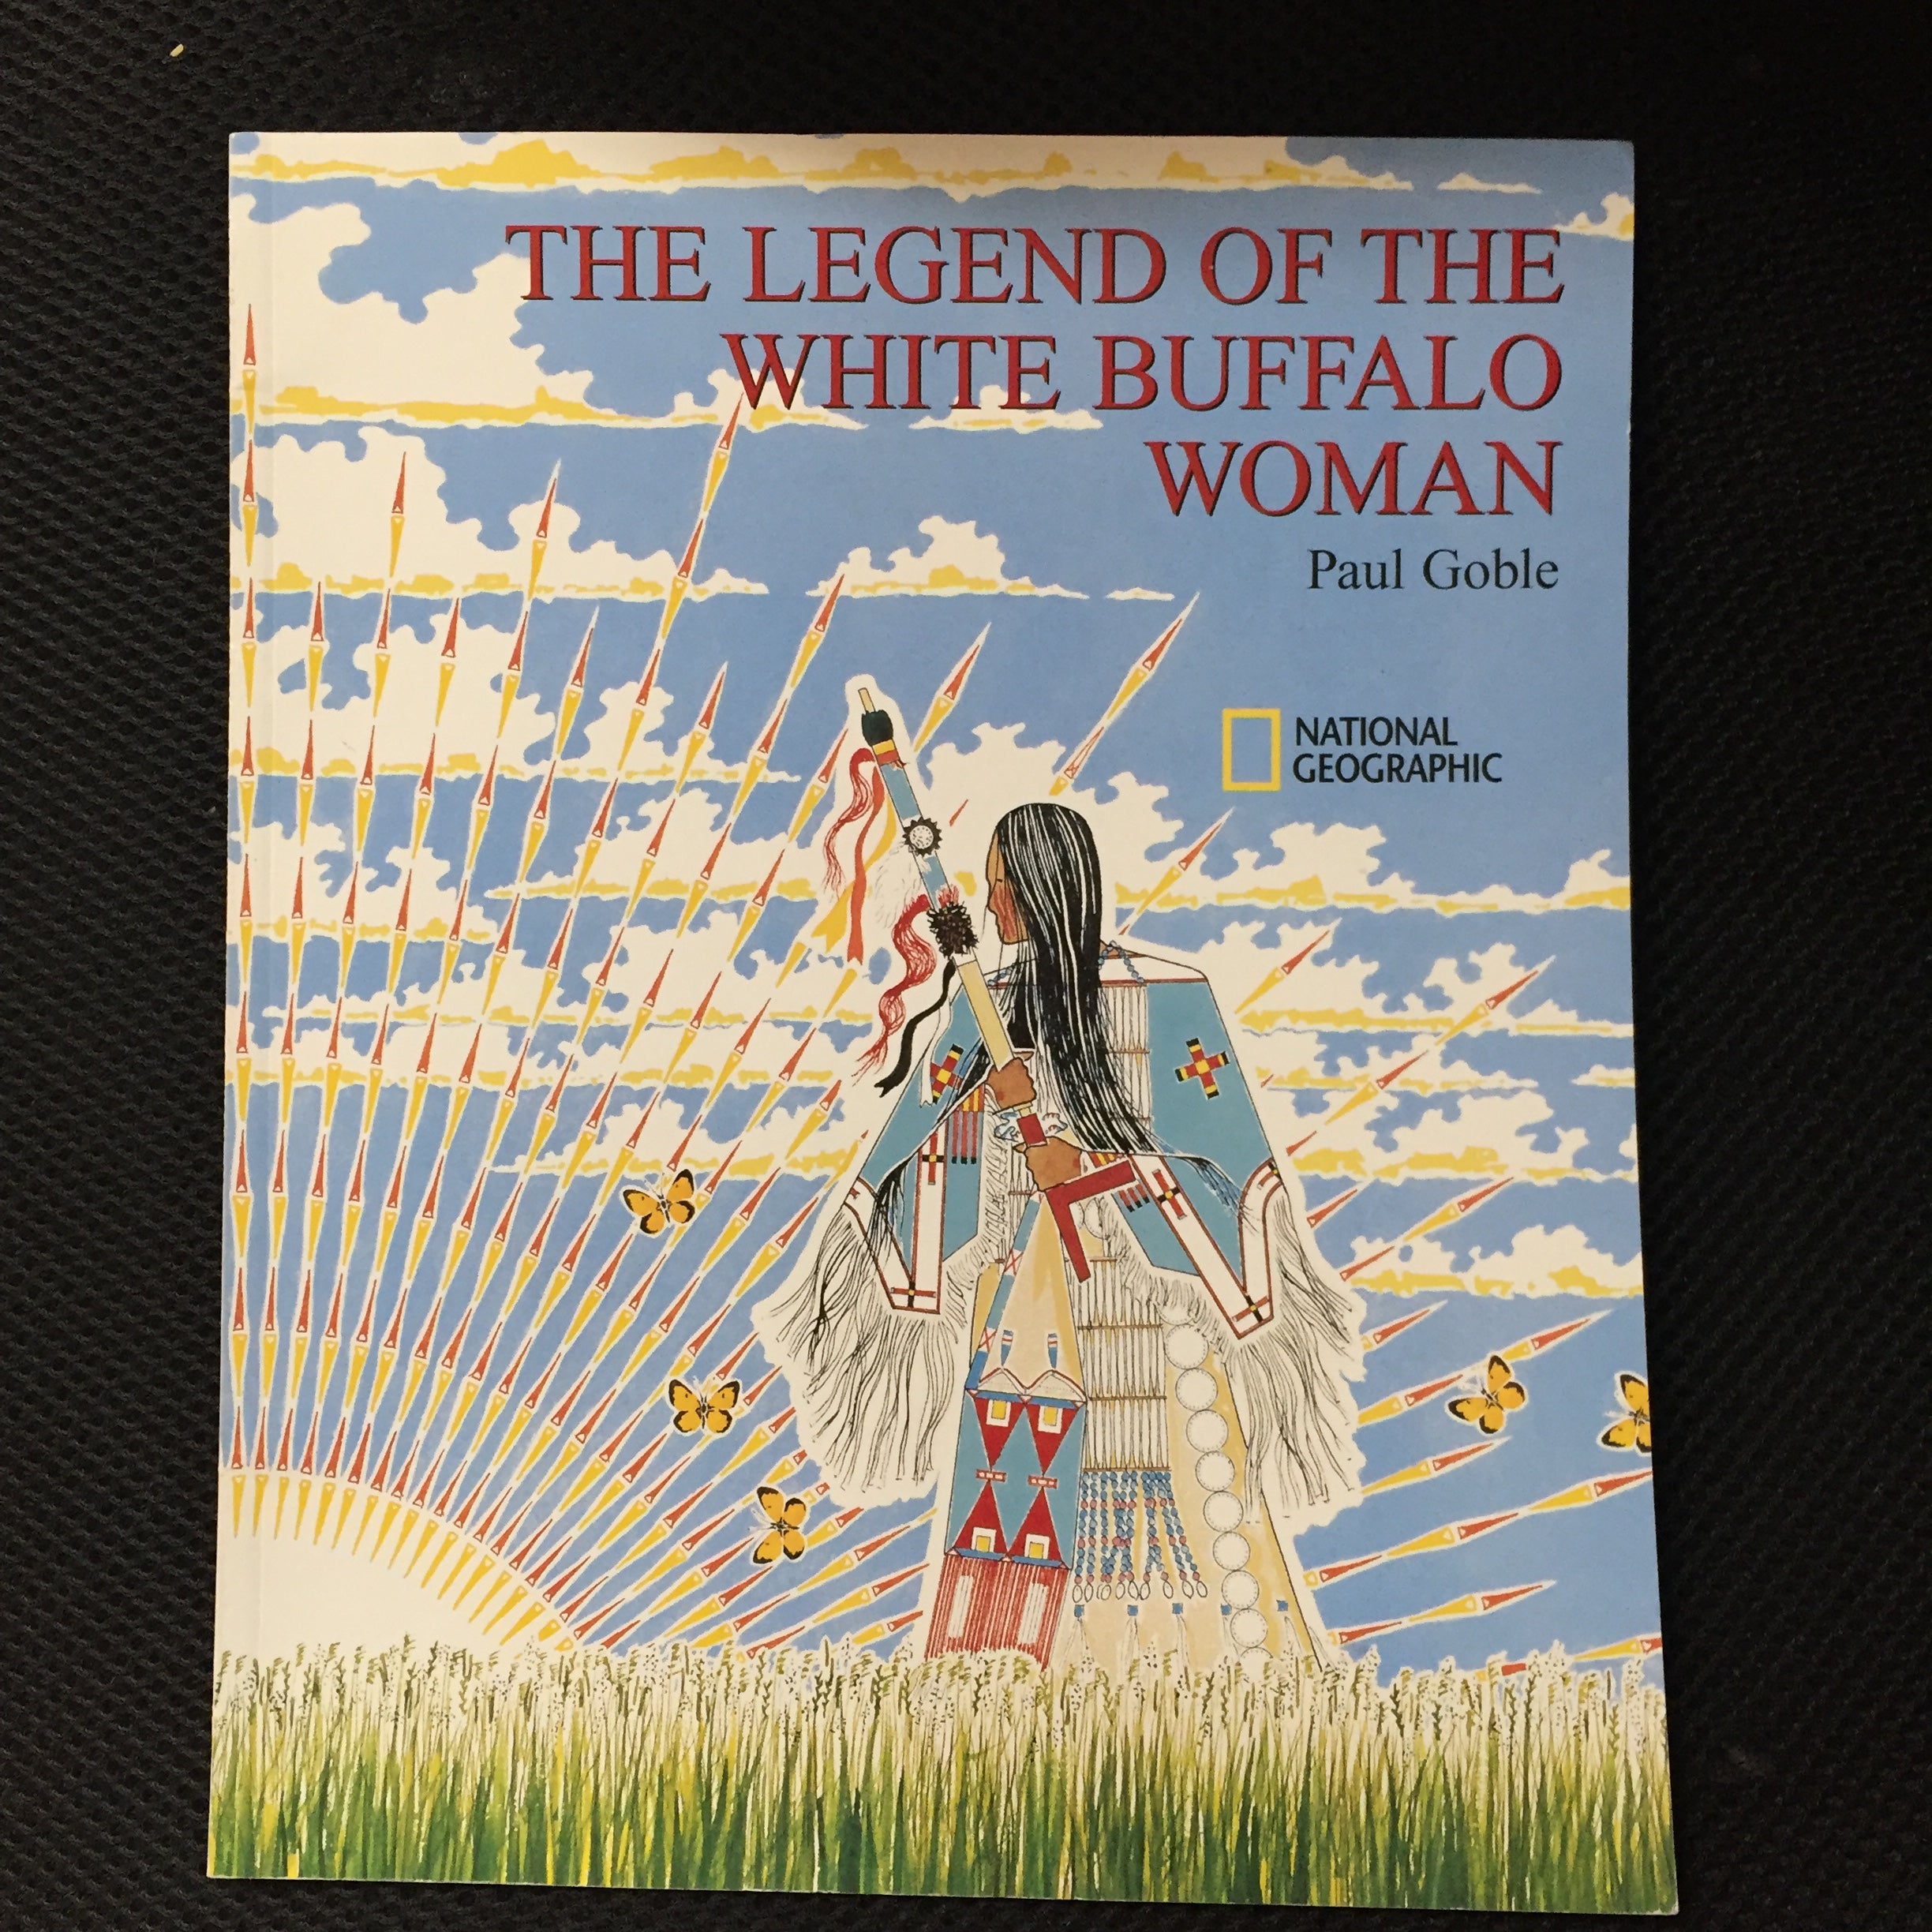 The Legend of the White Buffalo Woman